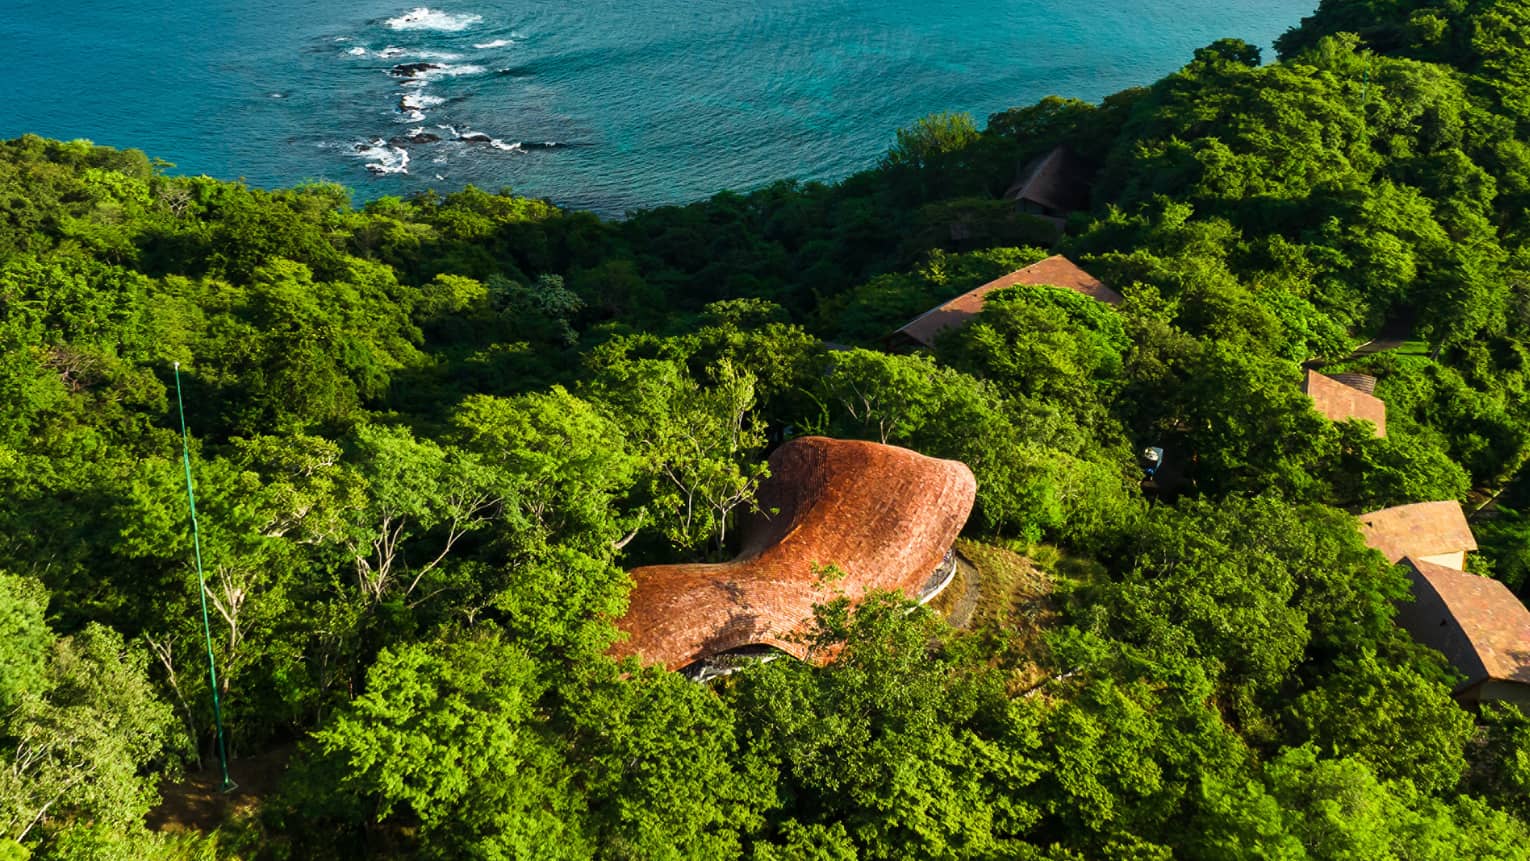 Aerial view of open-air Wellness Shala tucked between greenery on a hilltop overlooking the ocean